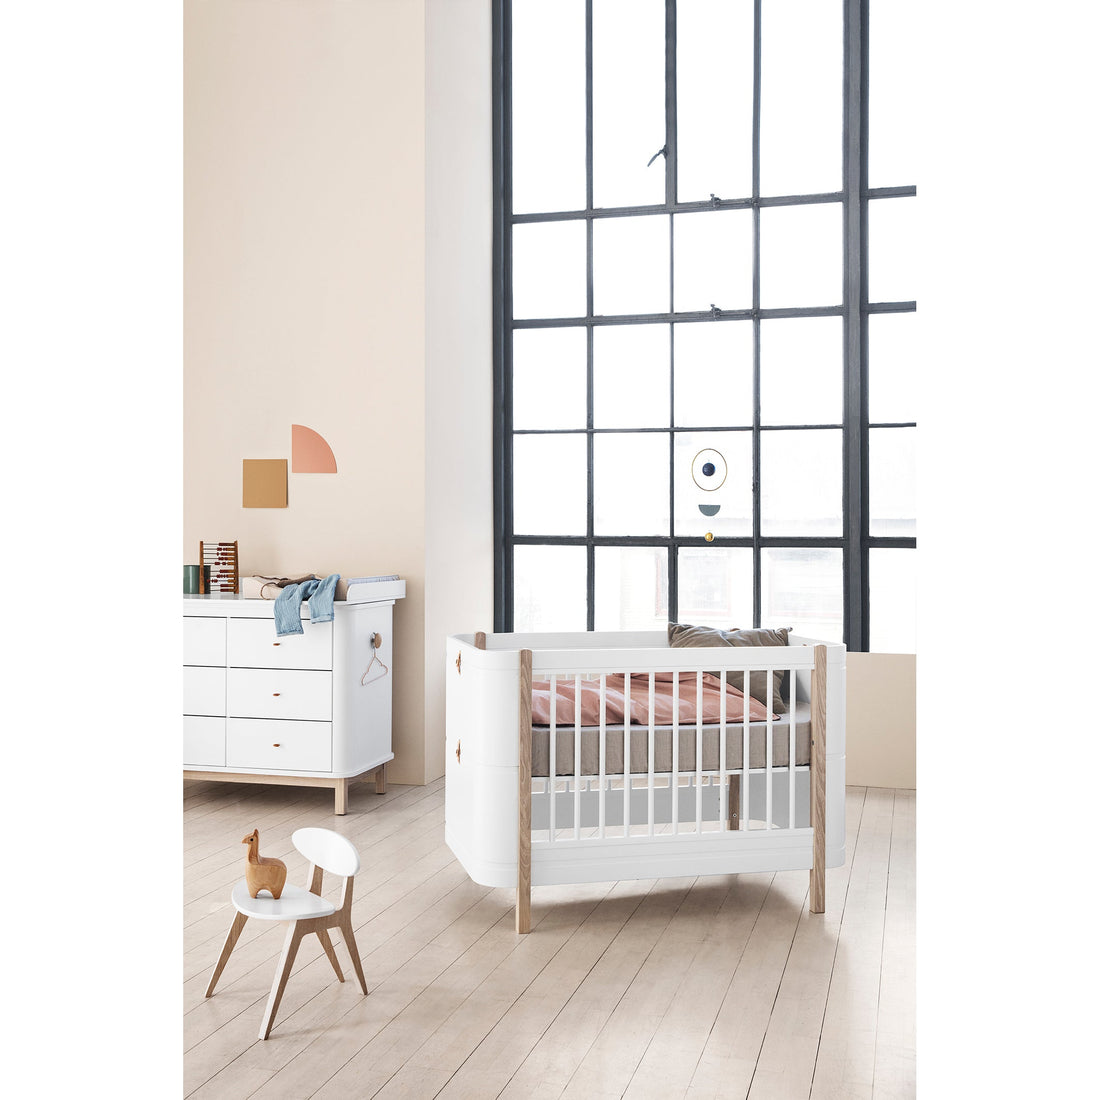 Oliver Furniture Wood Mini+ Cot Bed (Without Junior Conversion Kit) - White/Oak (Pre-Order; Est. Delivery in 6-10 Weeks)